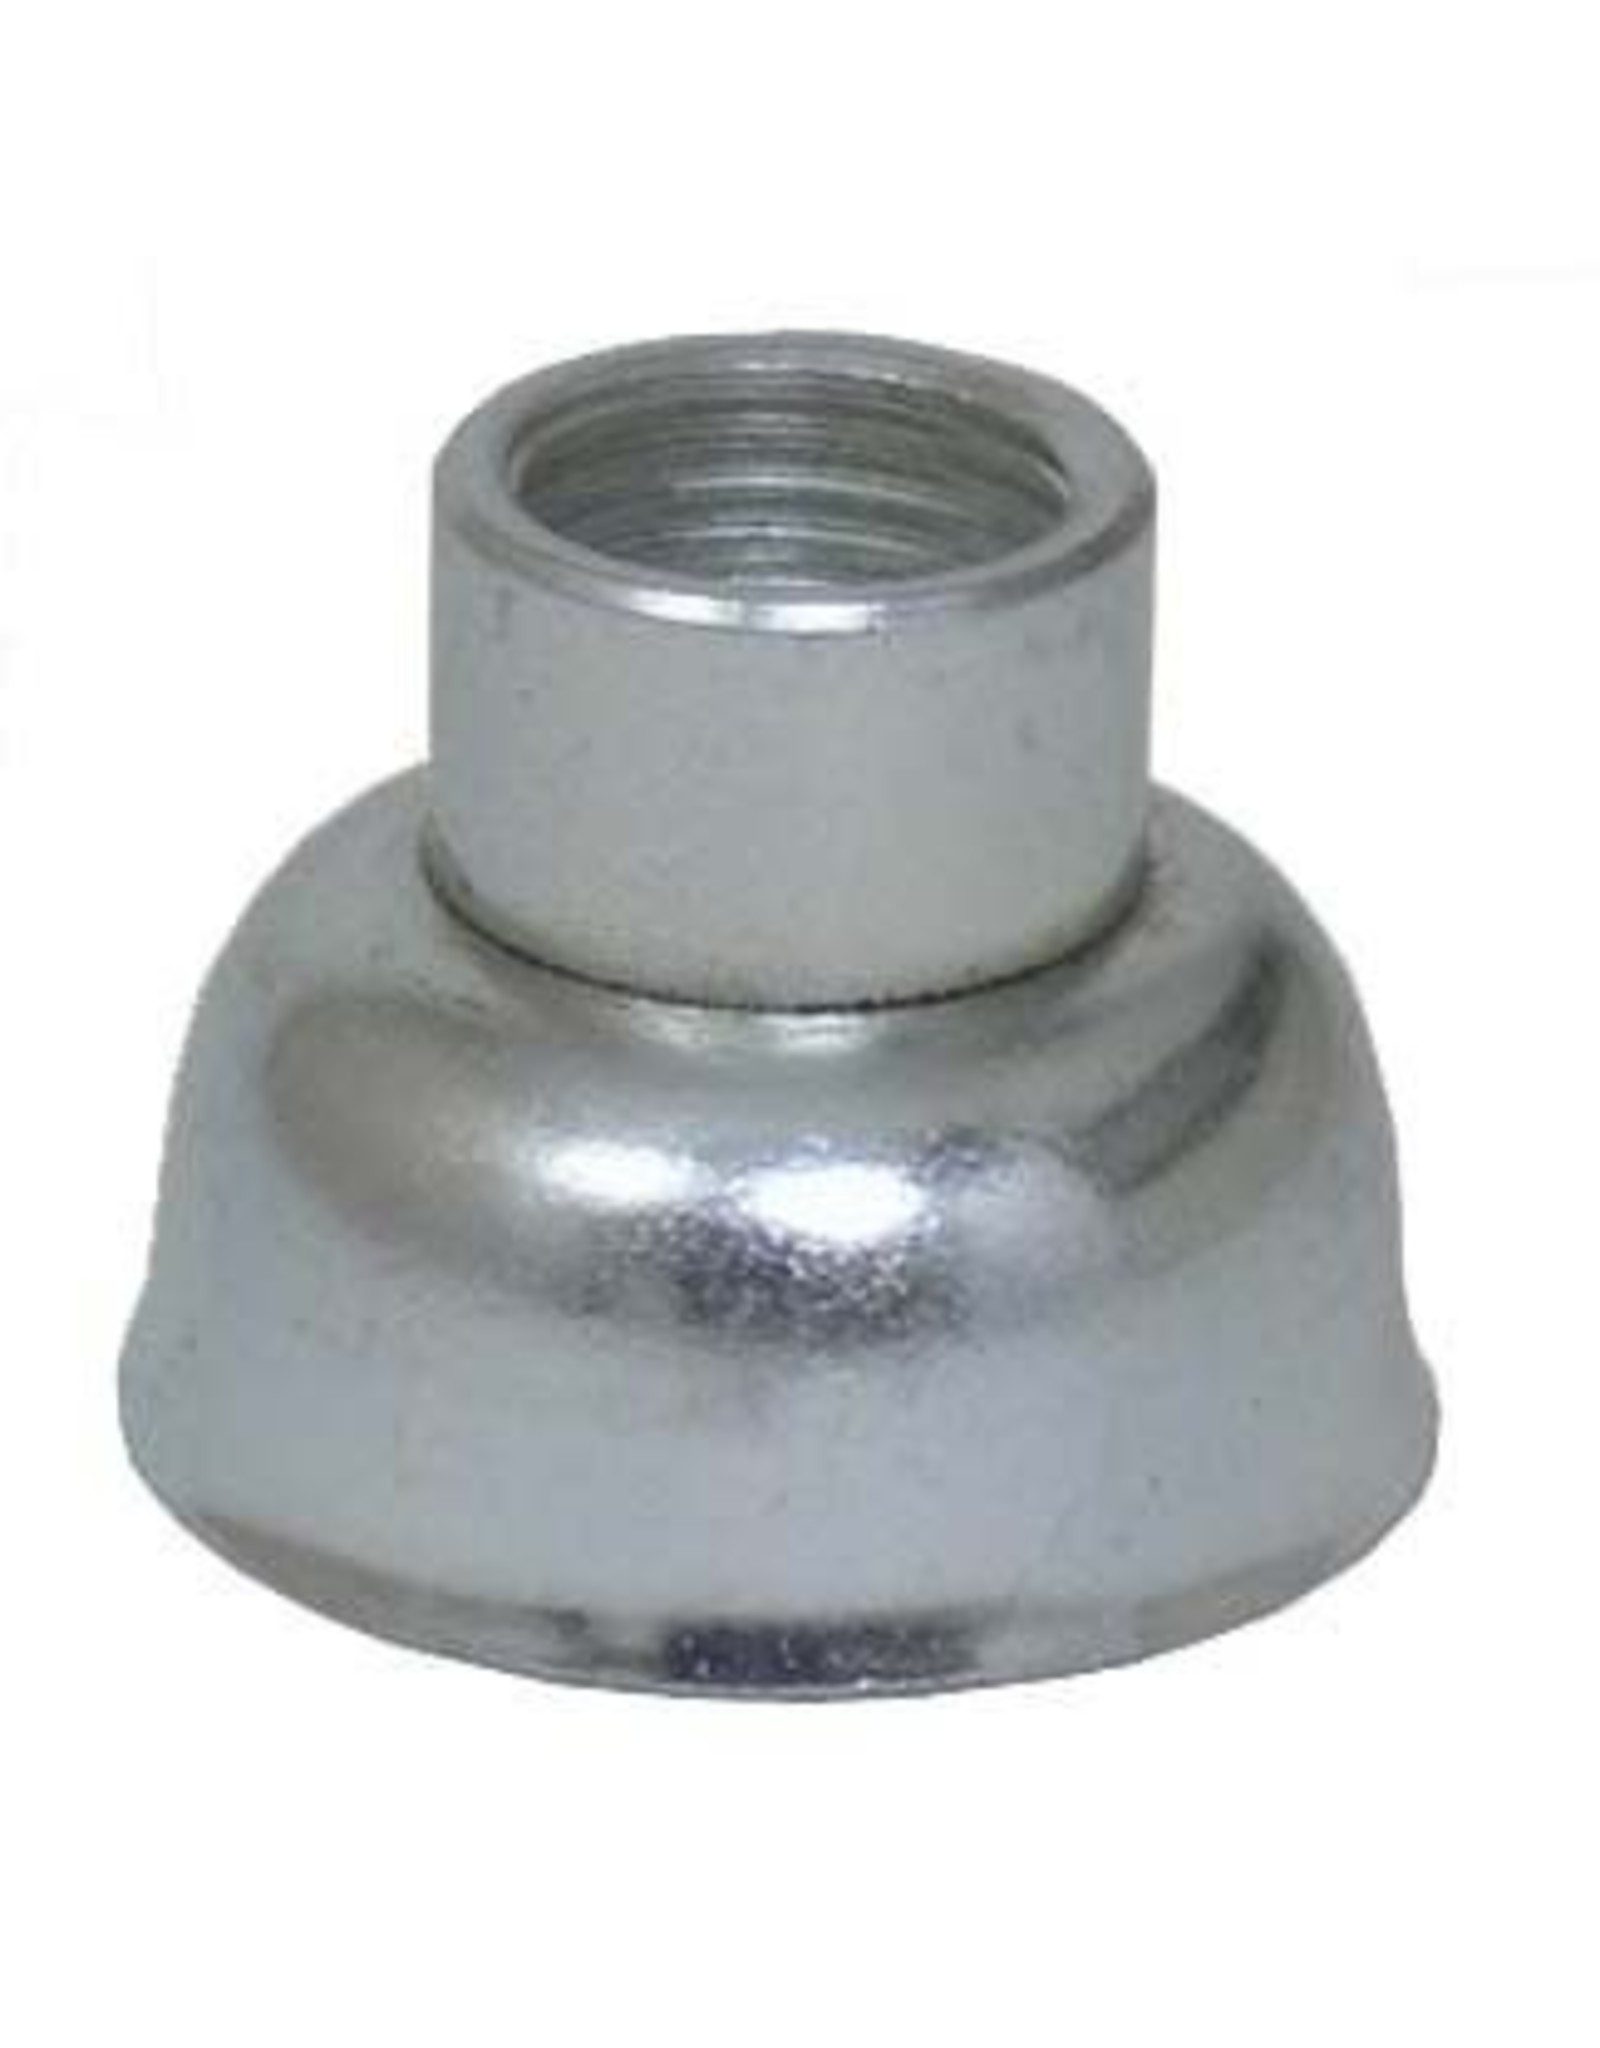 Capping Bell 29mm for EURO Caps